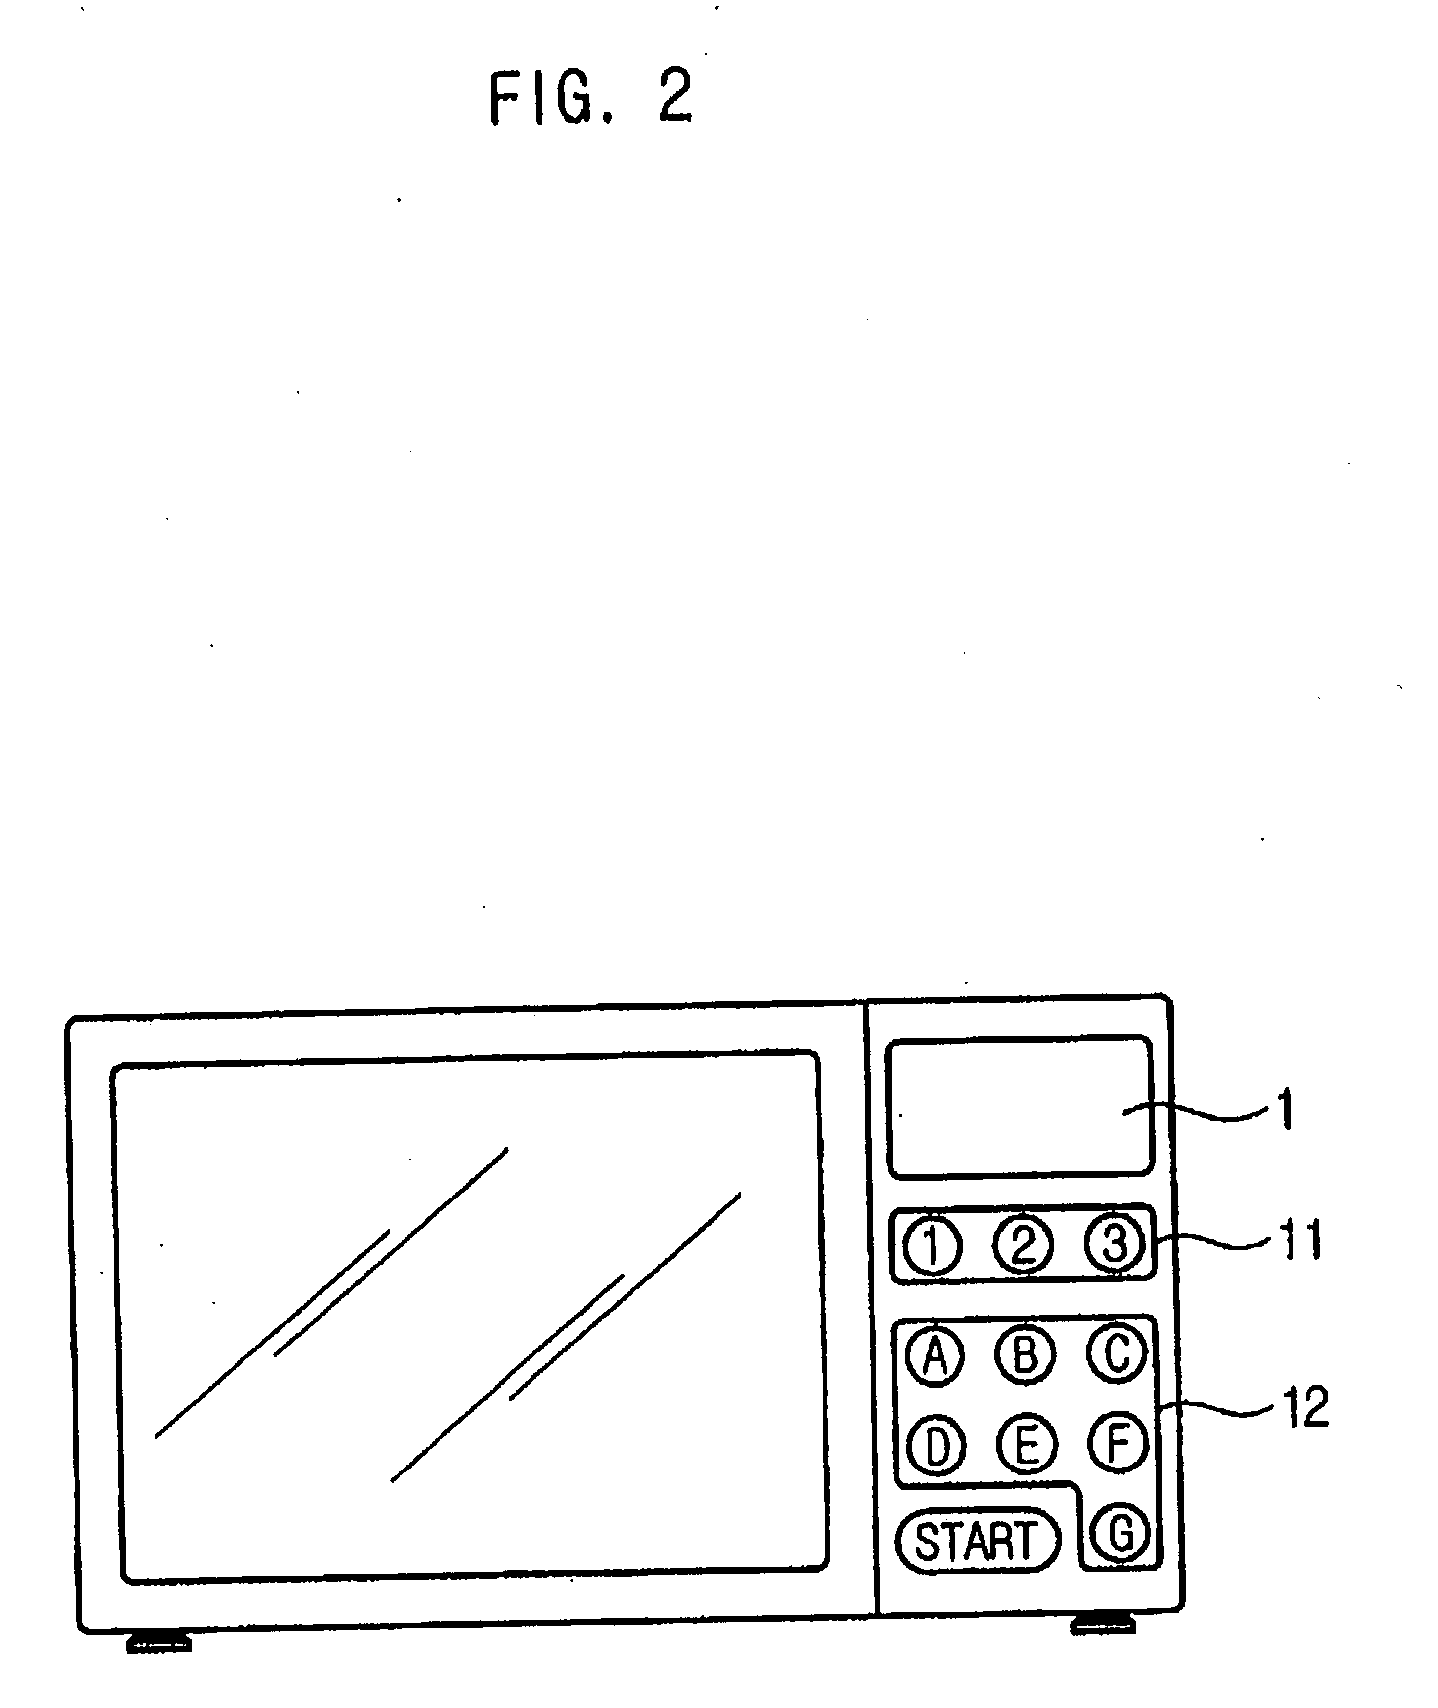 Microwave oven and method of controlling the same by setting function buttons